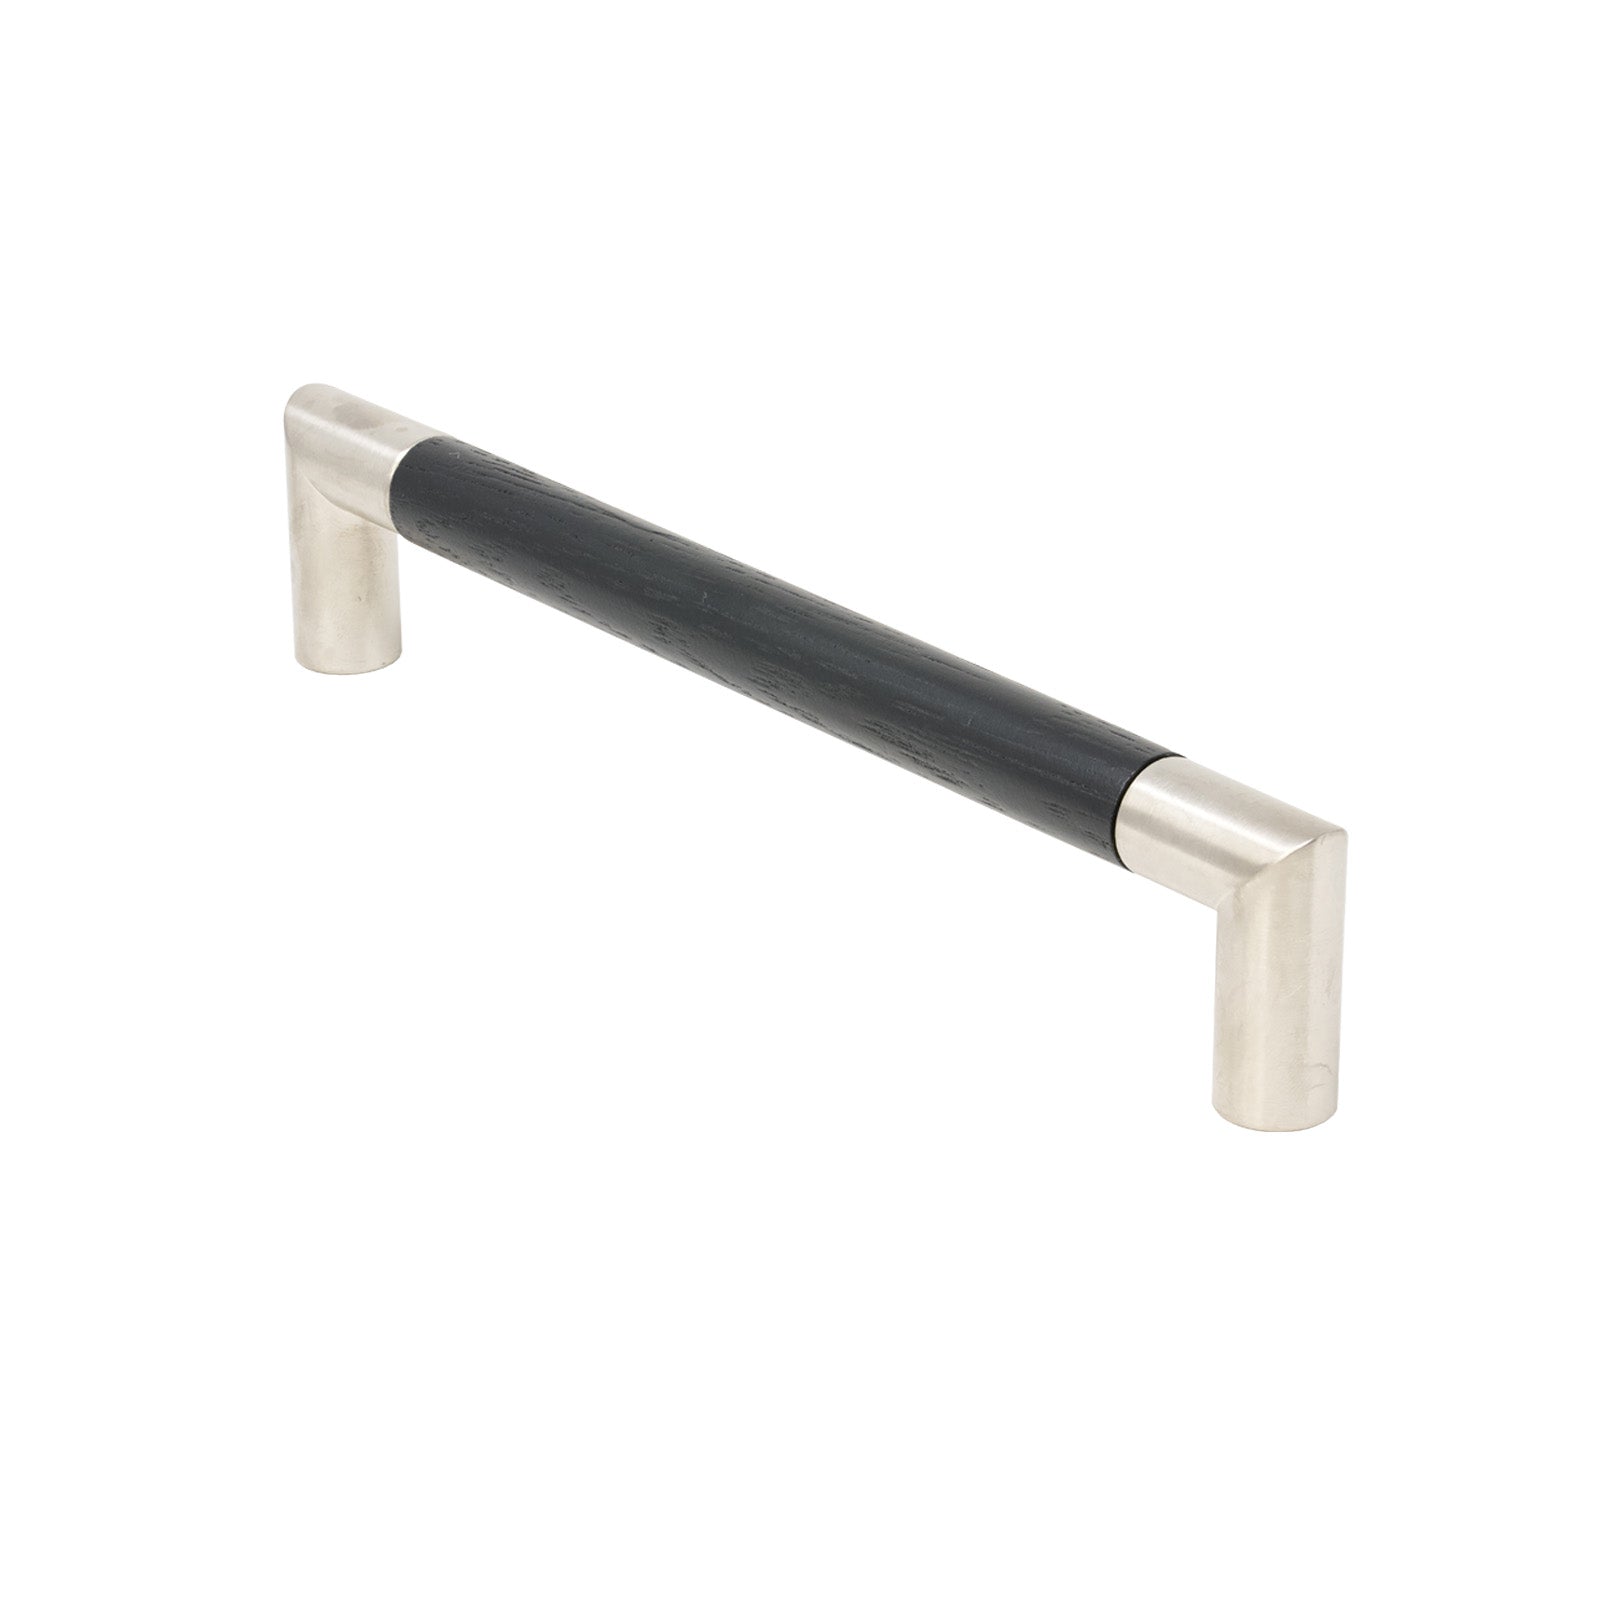 SHOW Angle Cabinet Pull Handle in Ash finish